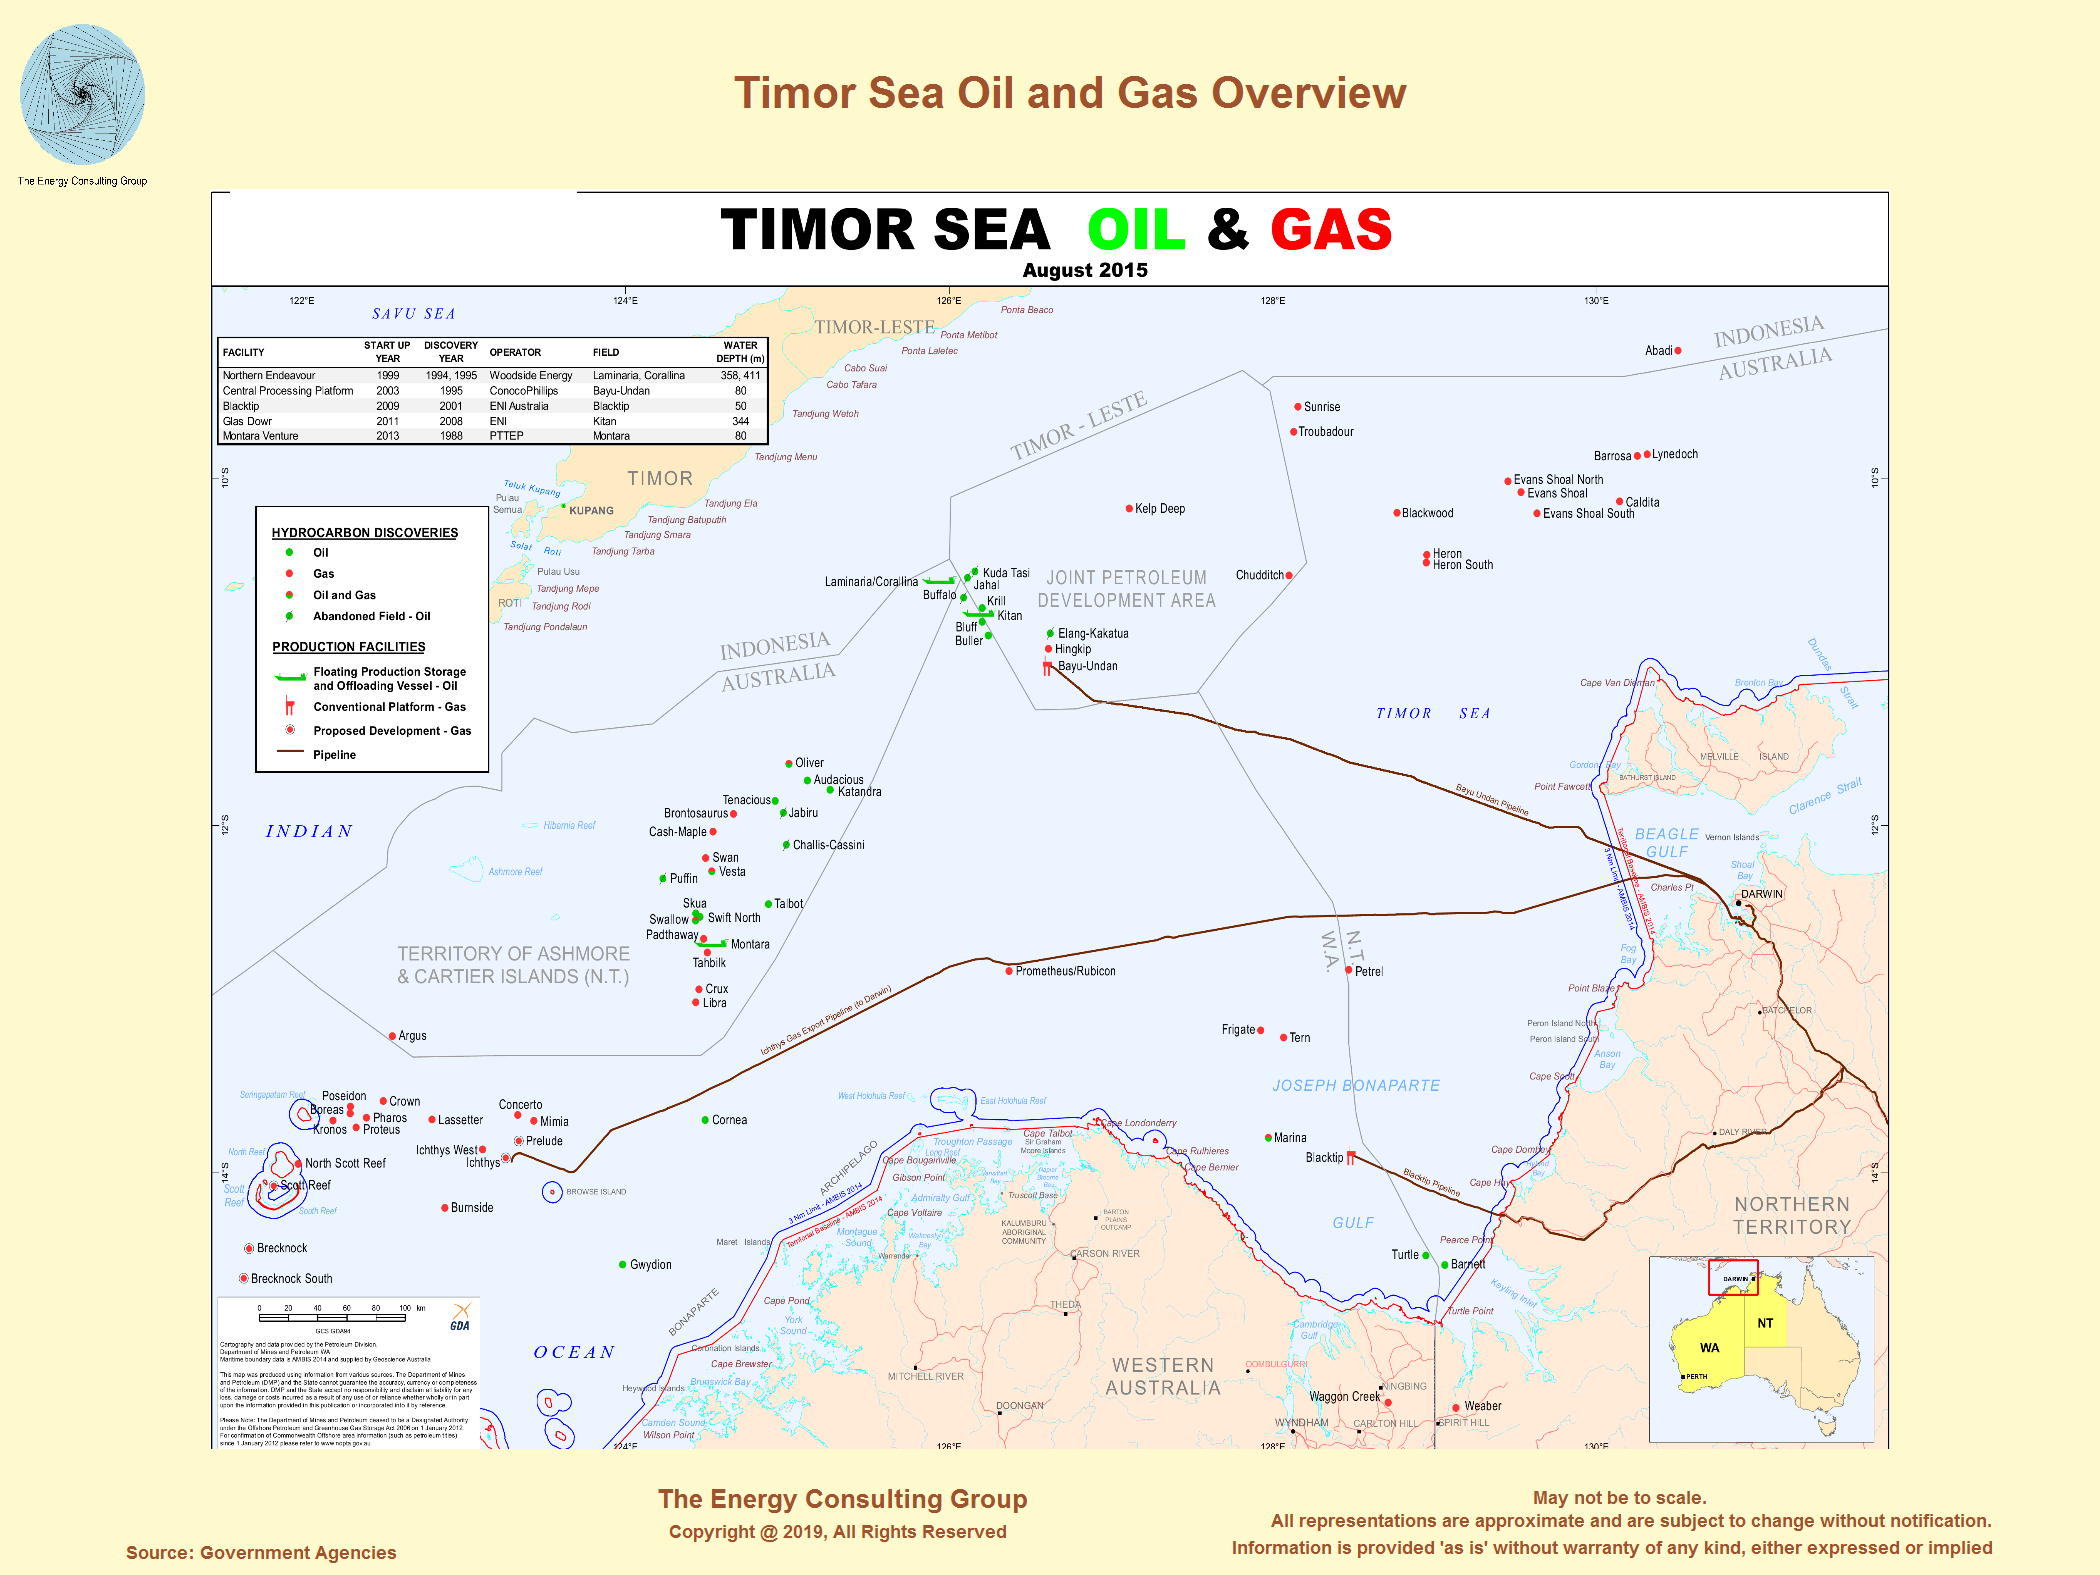 Australia and Gas Overview